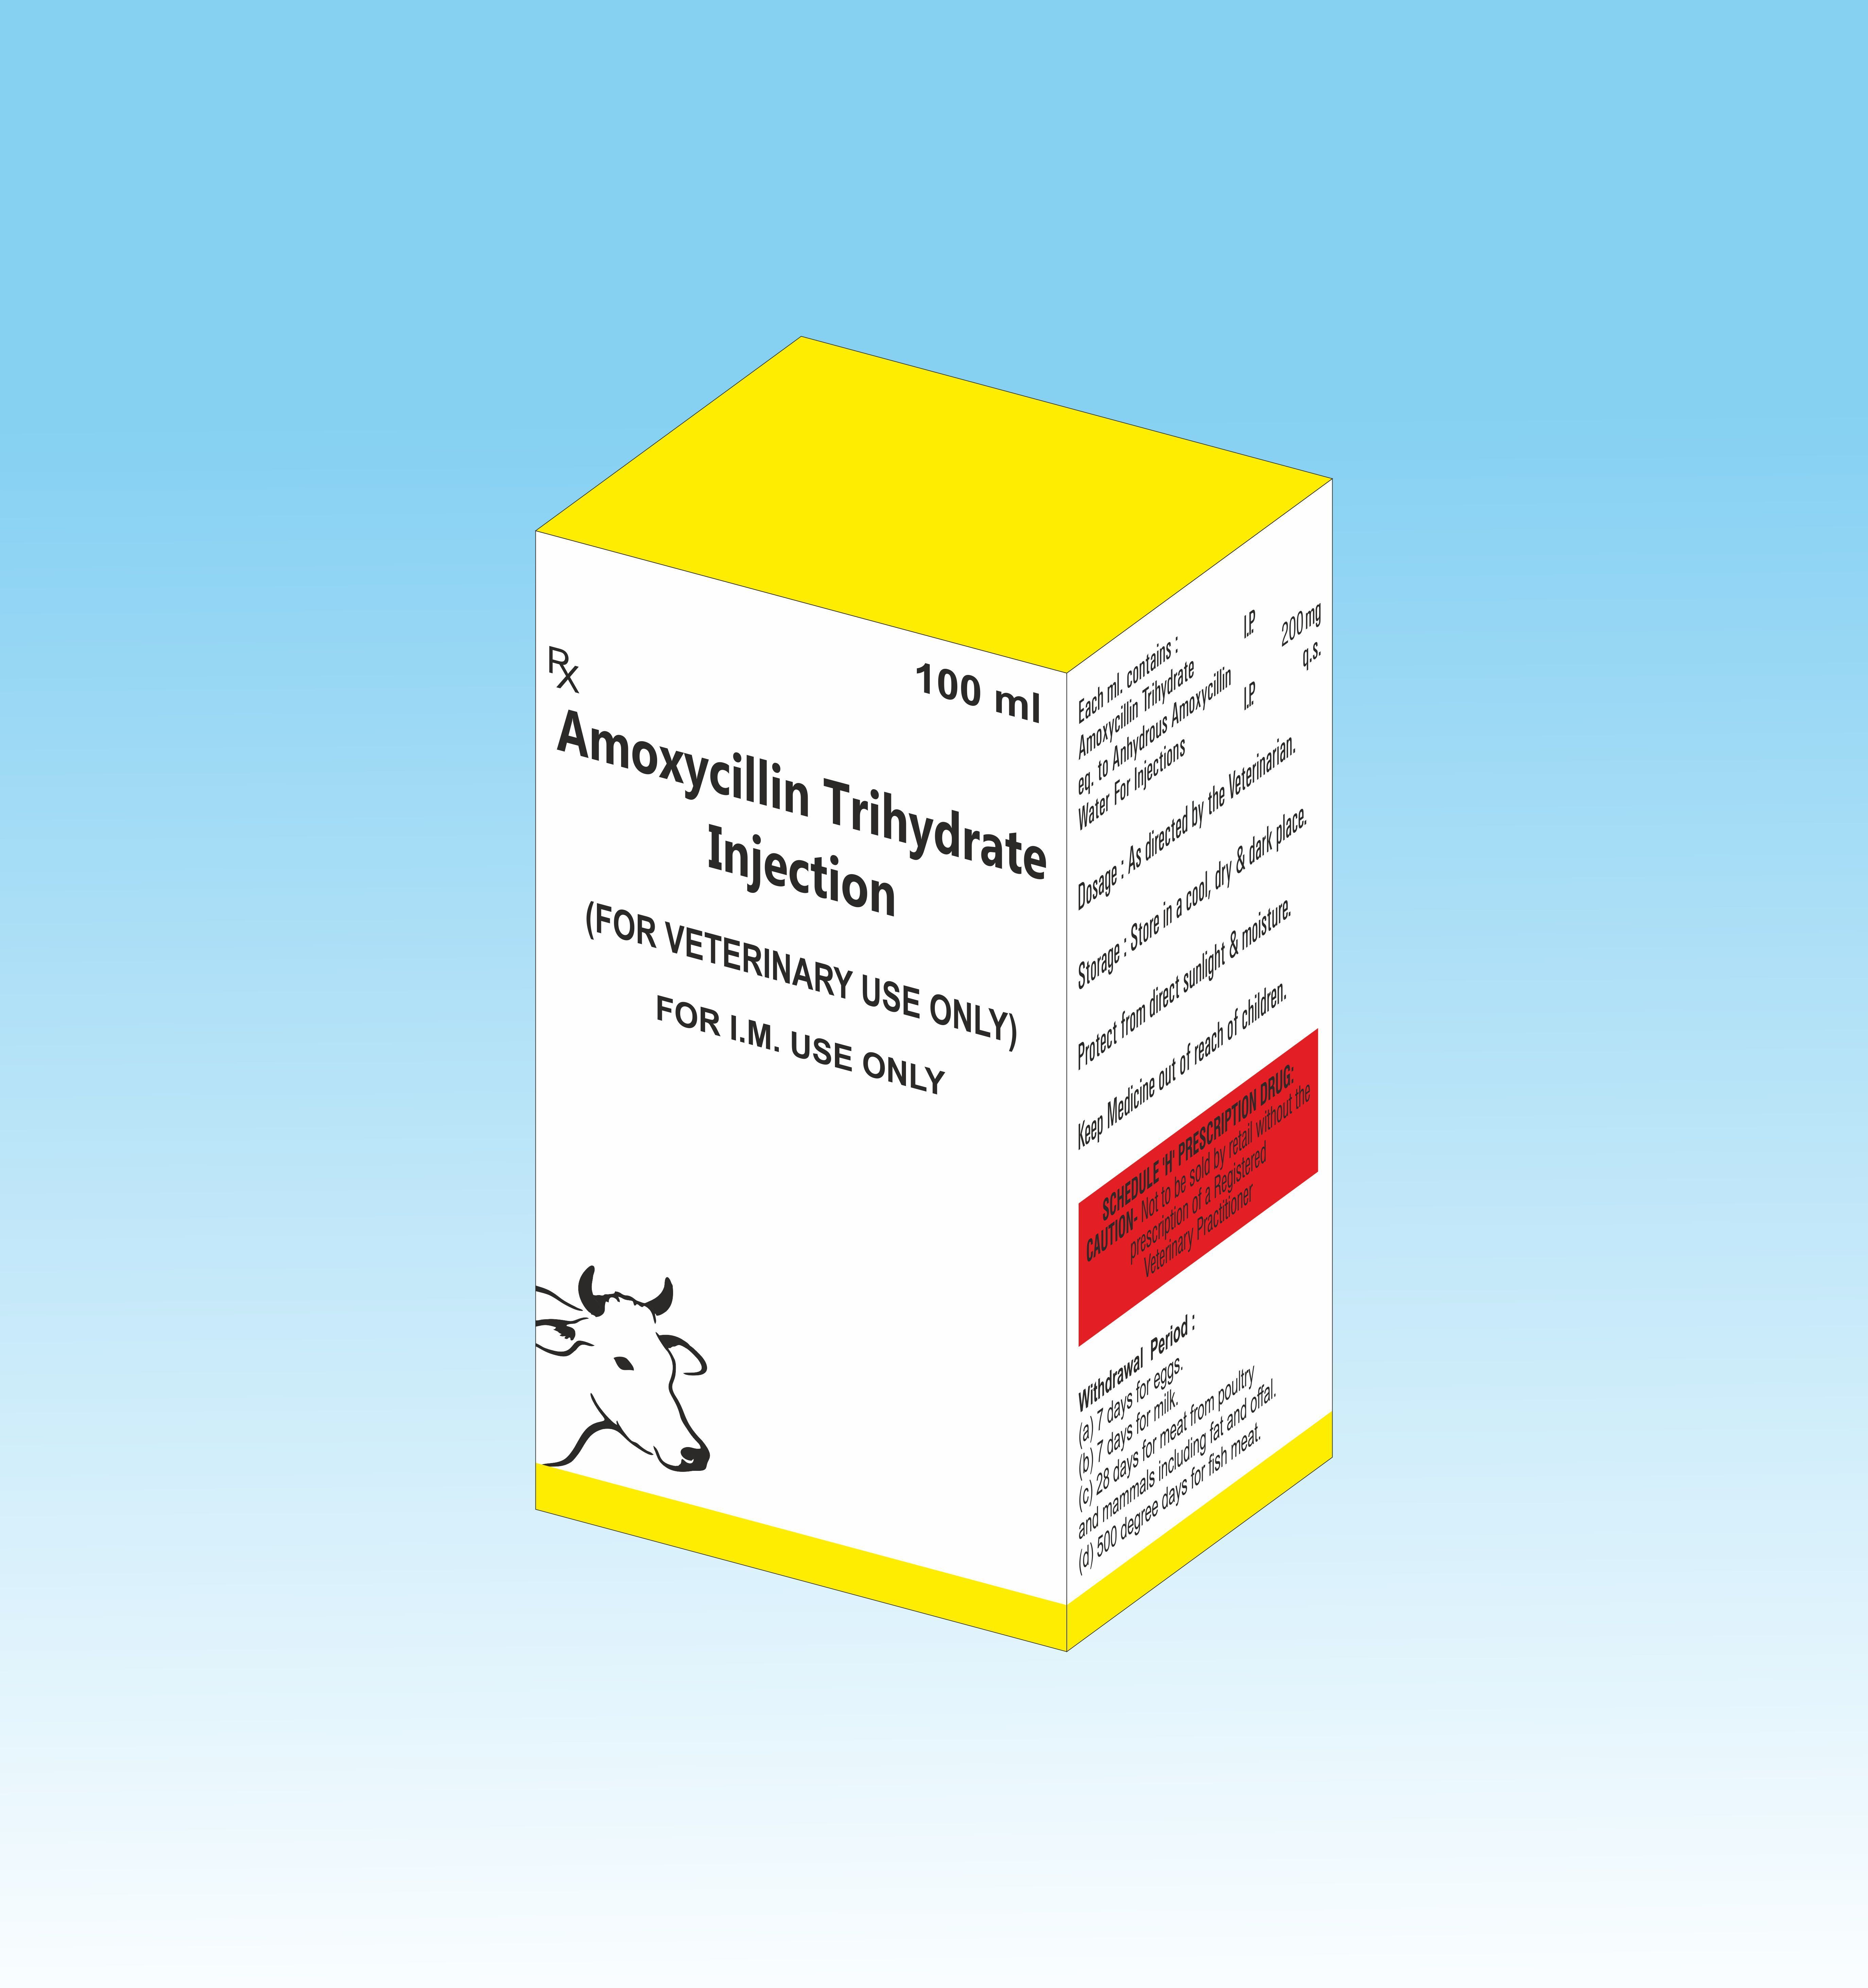 MELOXICAM WITH PARACETAMOL INJECTION IN THIRD PARTY MANUFACTURING